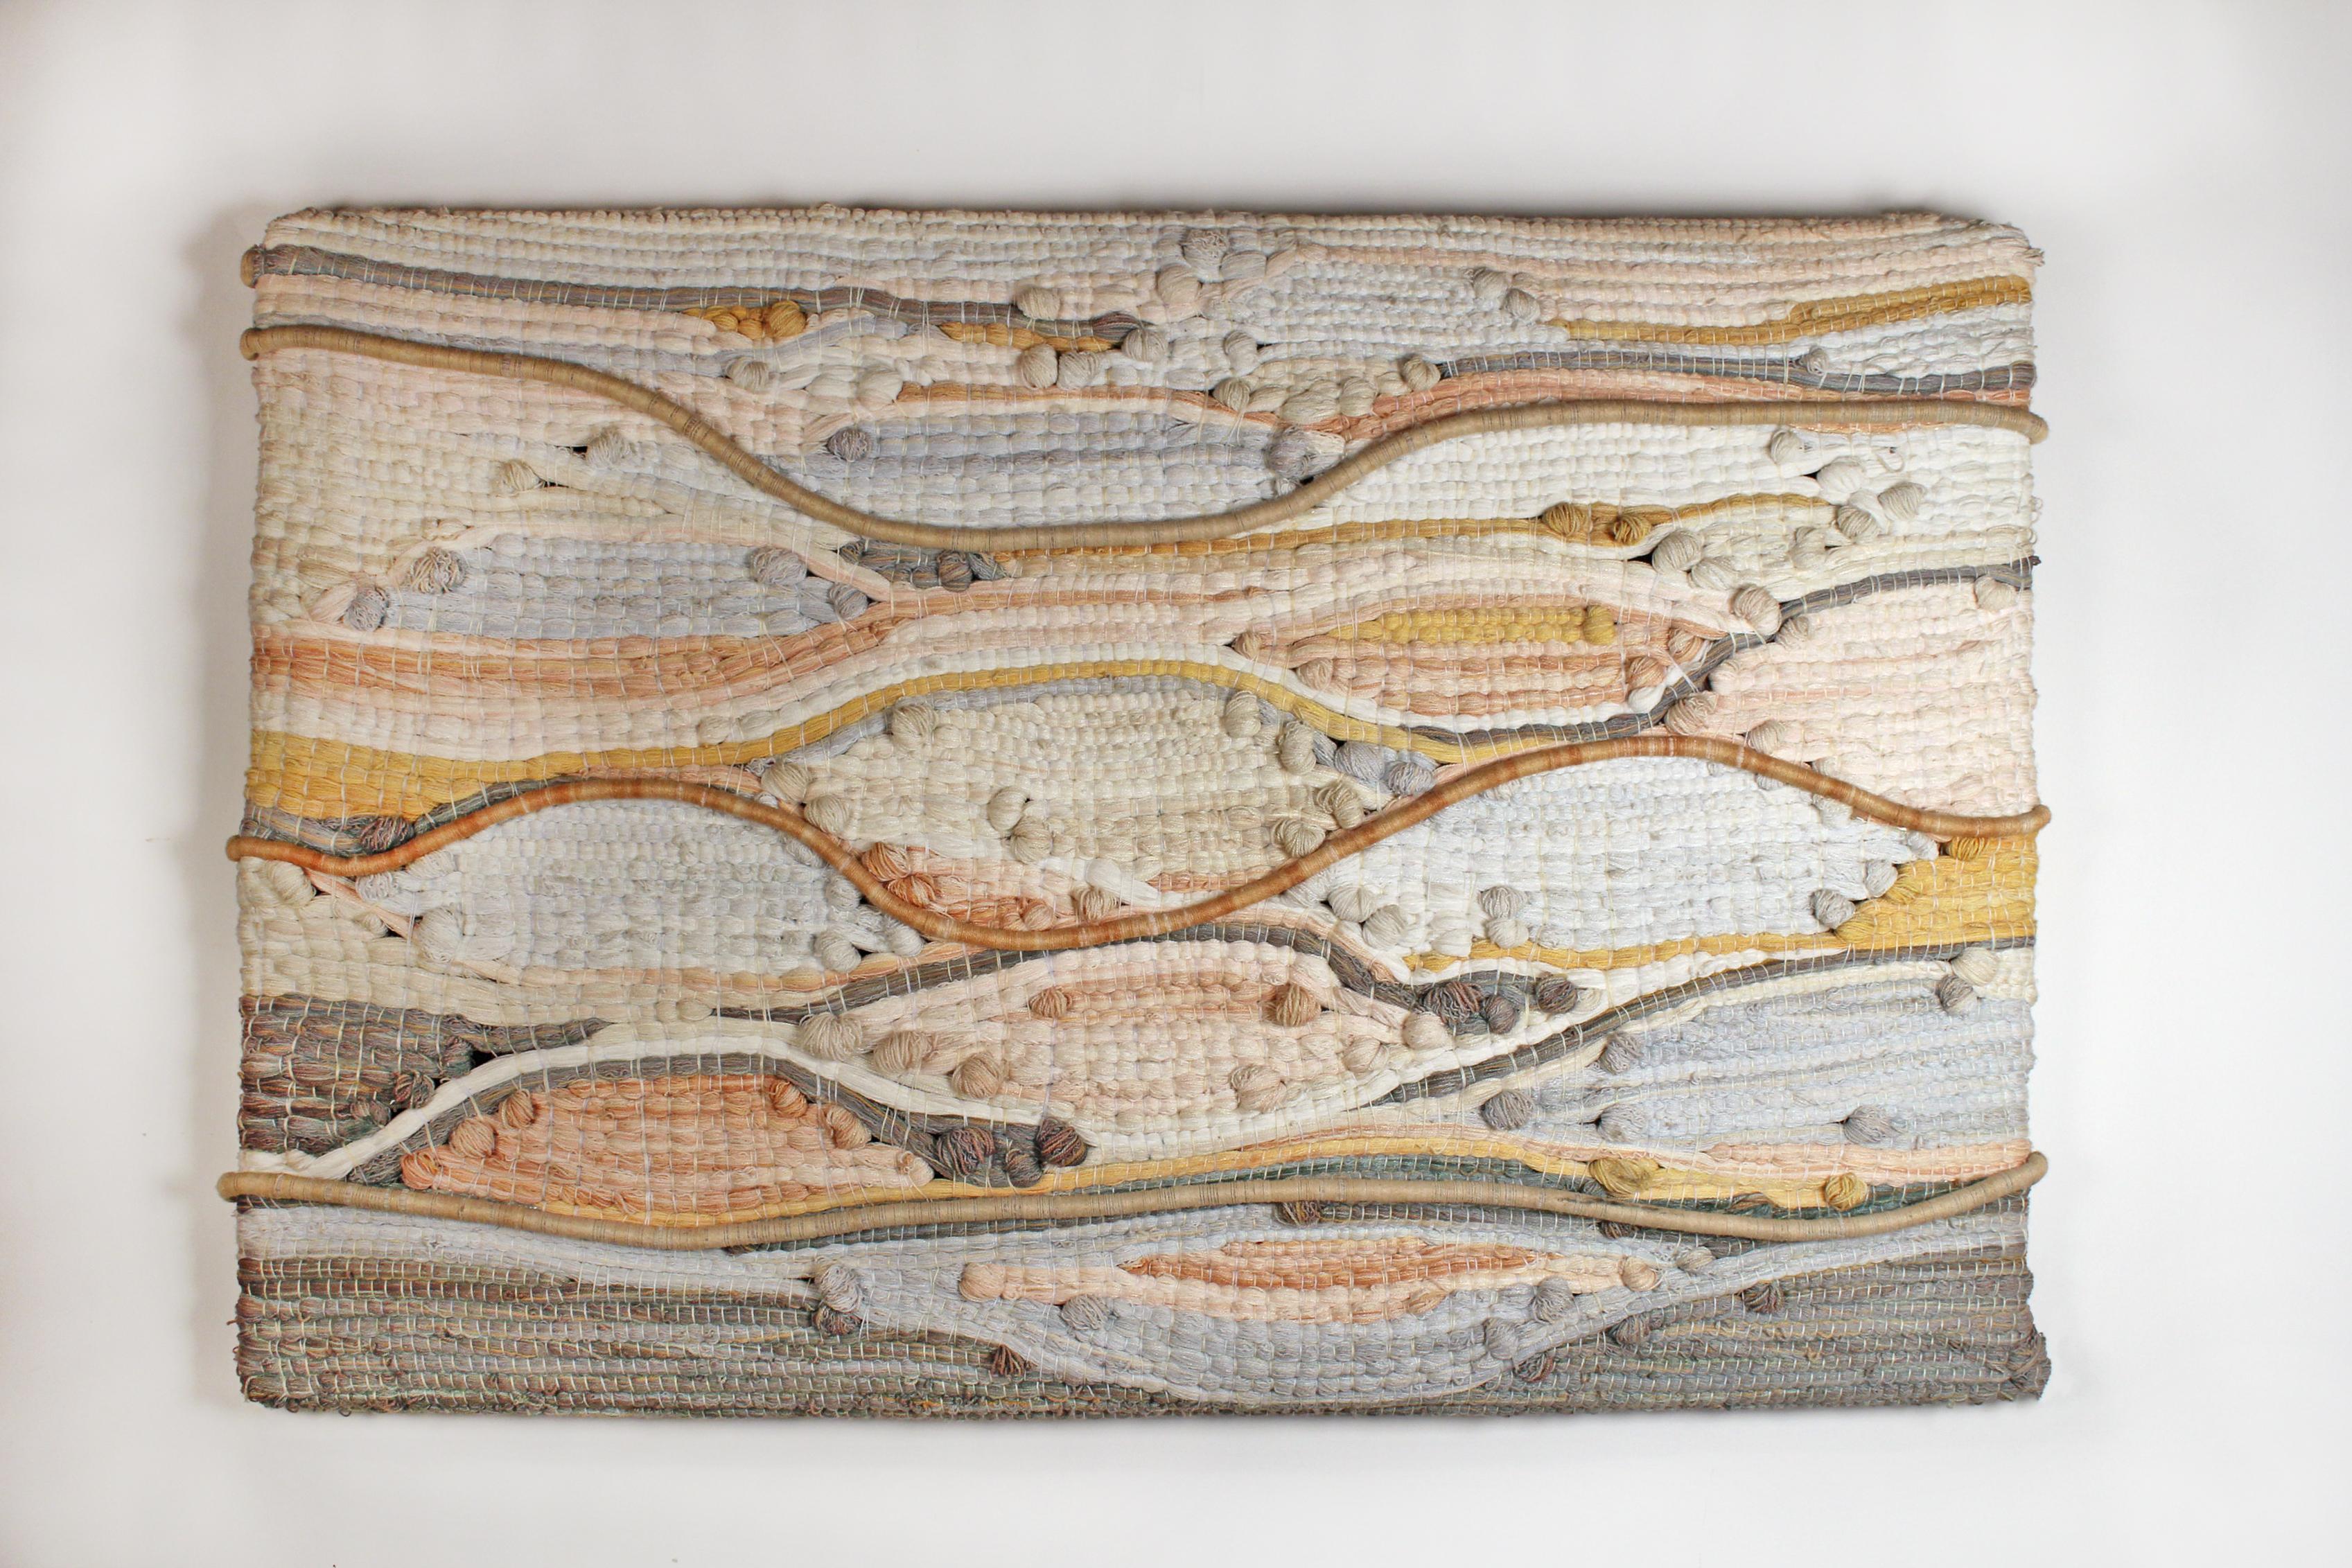 Modernist Fiber Art / Wall Textile 1970s Mid century California 

A very well designed abstract modernist wall textile. This piece is very well made and boasts a subtle palette with an extraordinary texture reminiscent of oceanic flora and fauna.